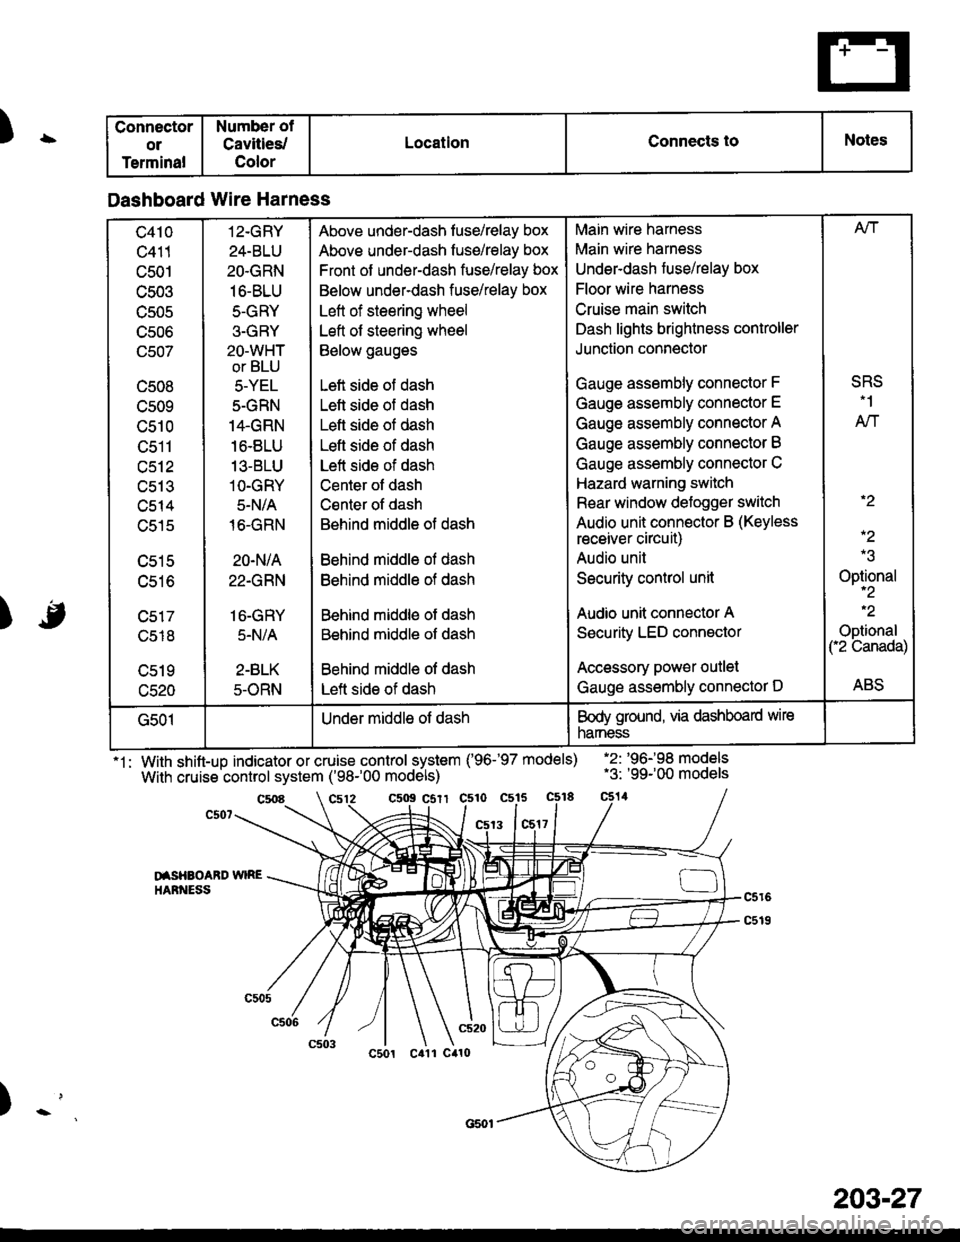 HONDA CIVIC 1996 6.G Workshop Manual )\
) -,
.
1: With shift-up indicator or cruise control system (96-97 models)
With cruise control system (98-00 models)
.2: 96198 models.3: 99-00 models
c5o9 csrr c510 c515
13 1c517
DISHAOABD 